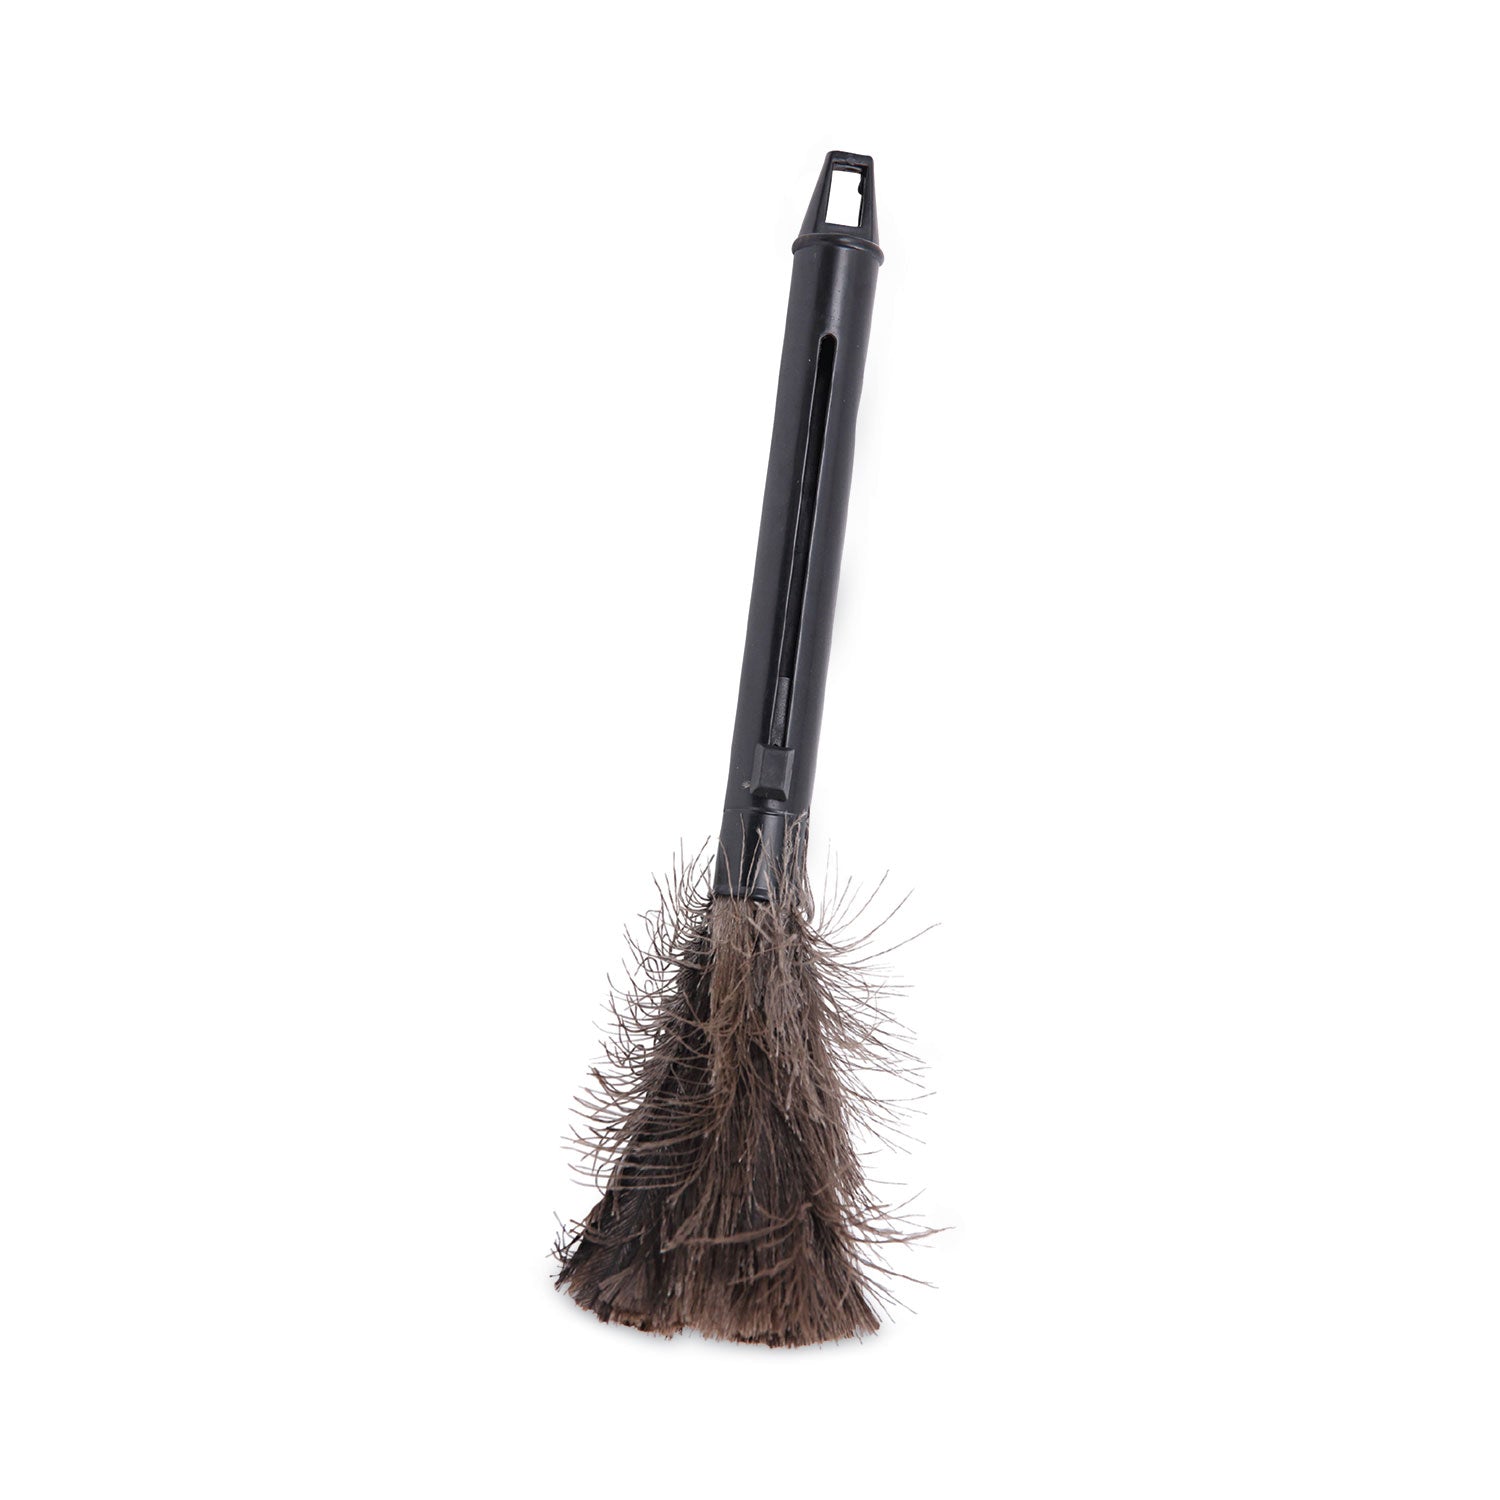 retractable-feather-duster-9-to-14-handle_bwk914fd - 1